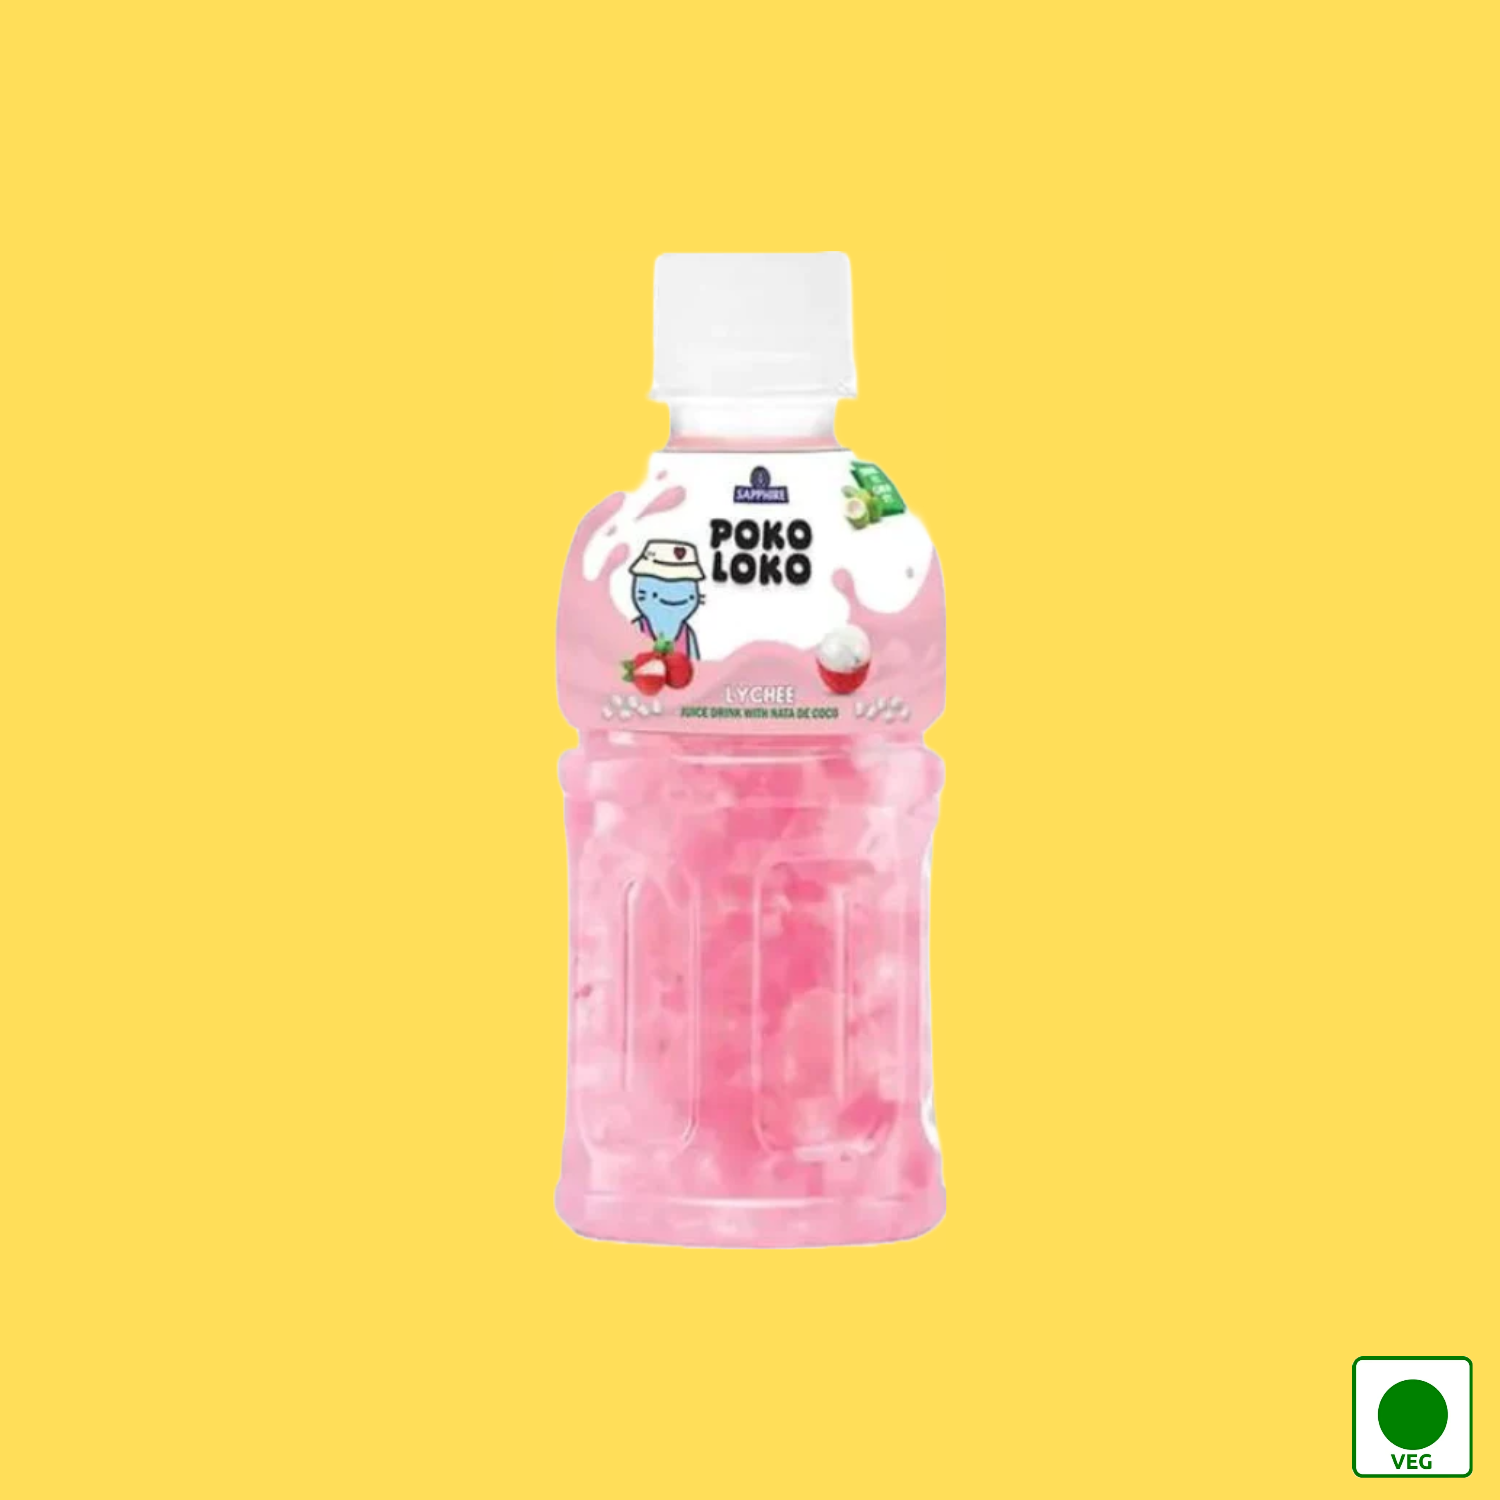 Sapphire Poko Loko Lychee Flavoured Juice Drink With Nata De Coco, 300ml (Imported)